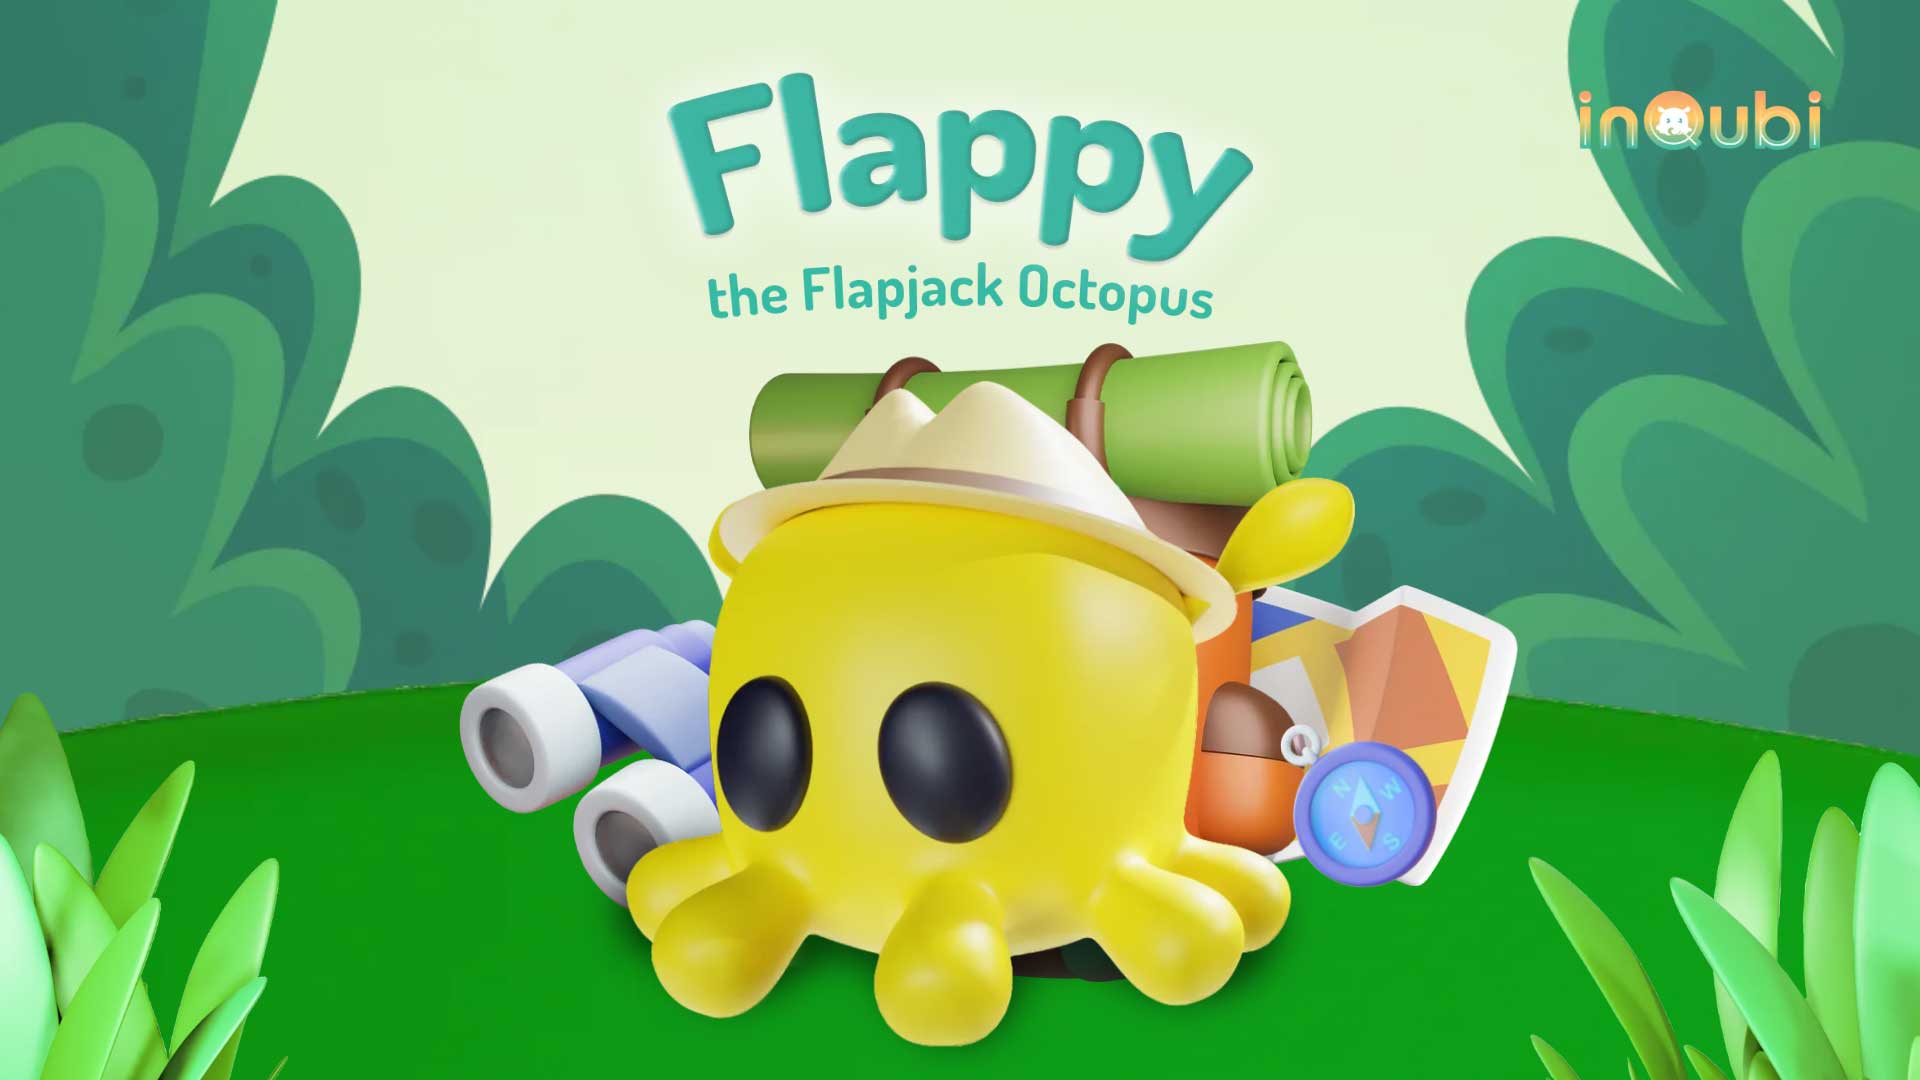 Flappy the Flapjack Octopus by inQubi